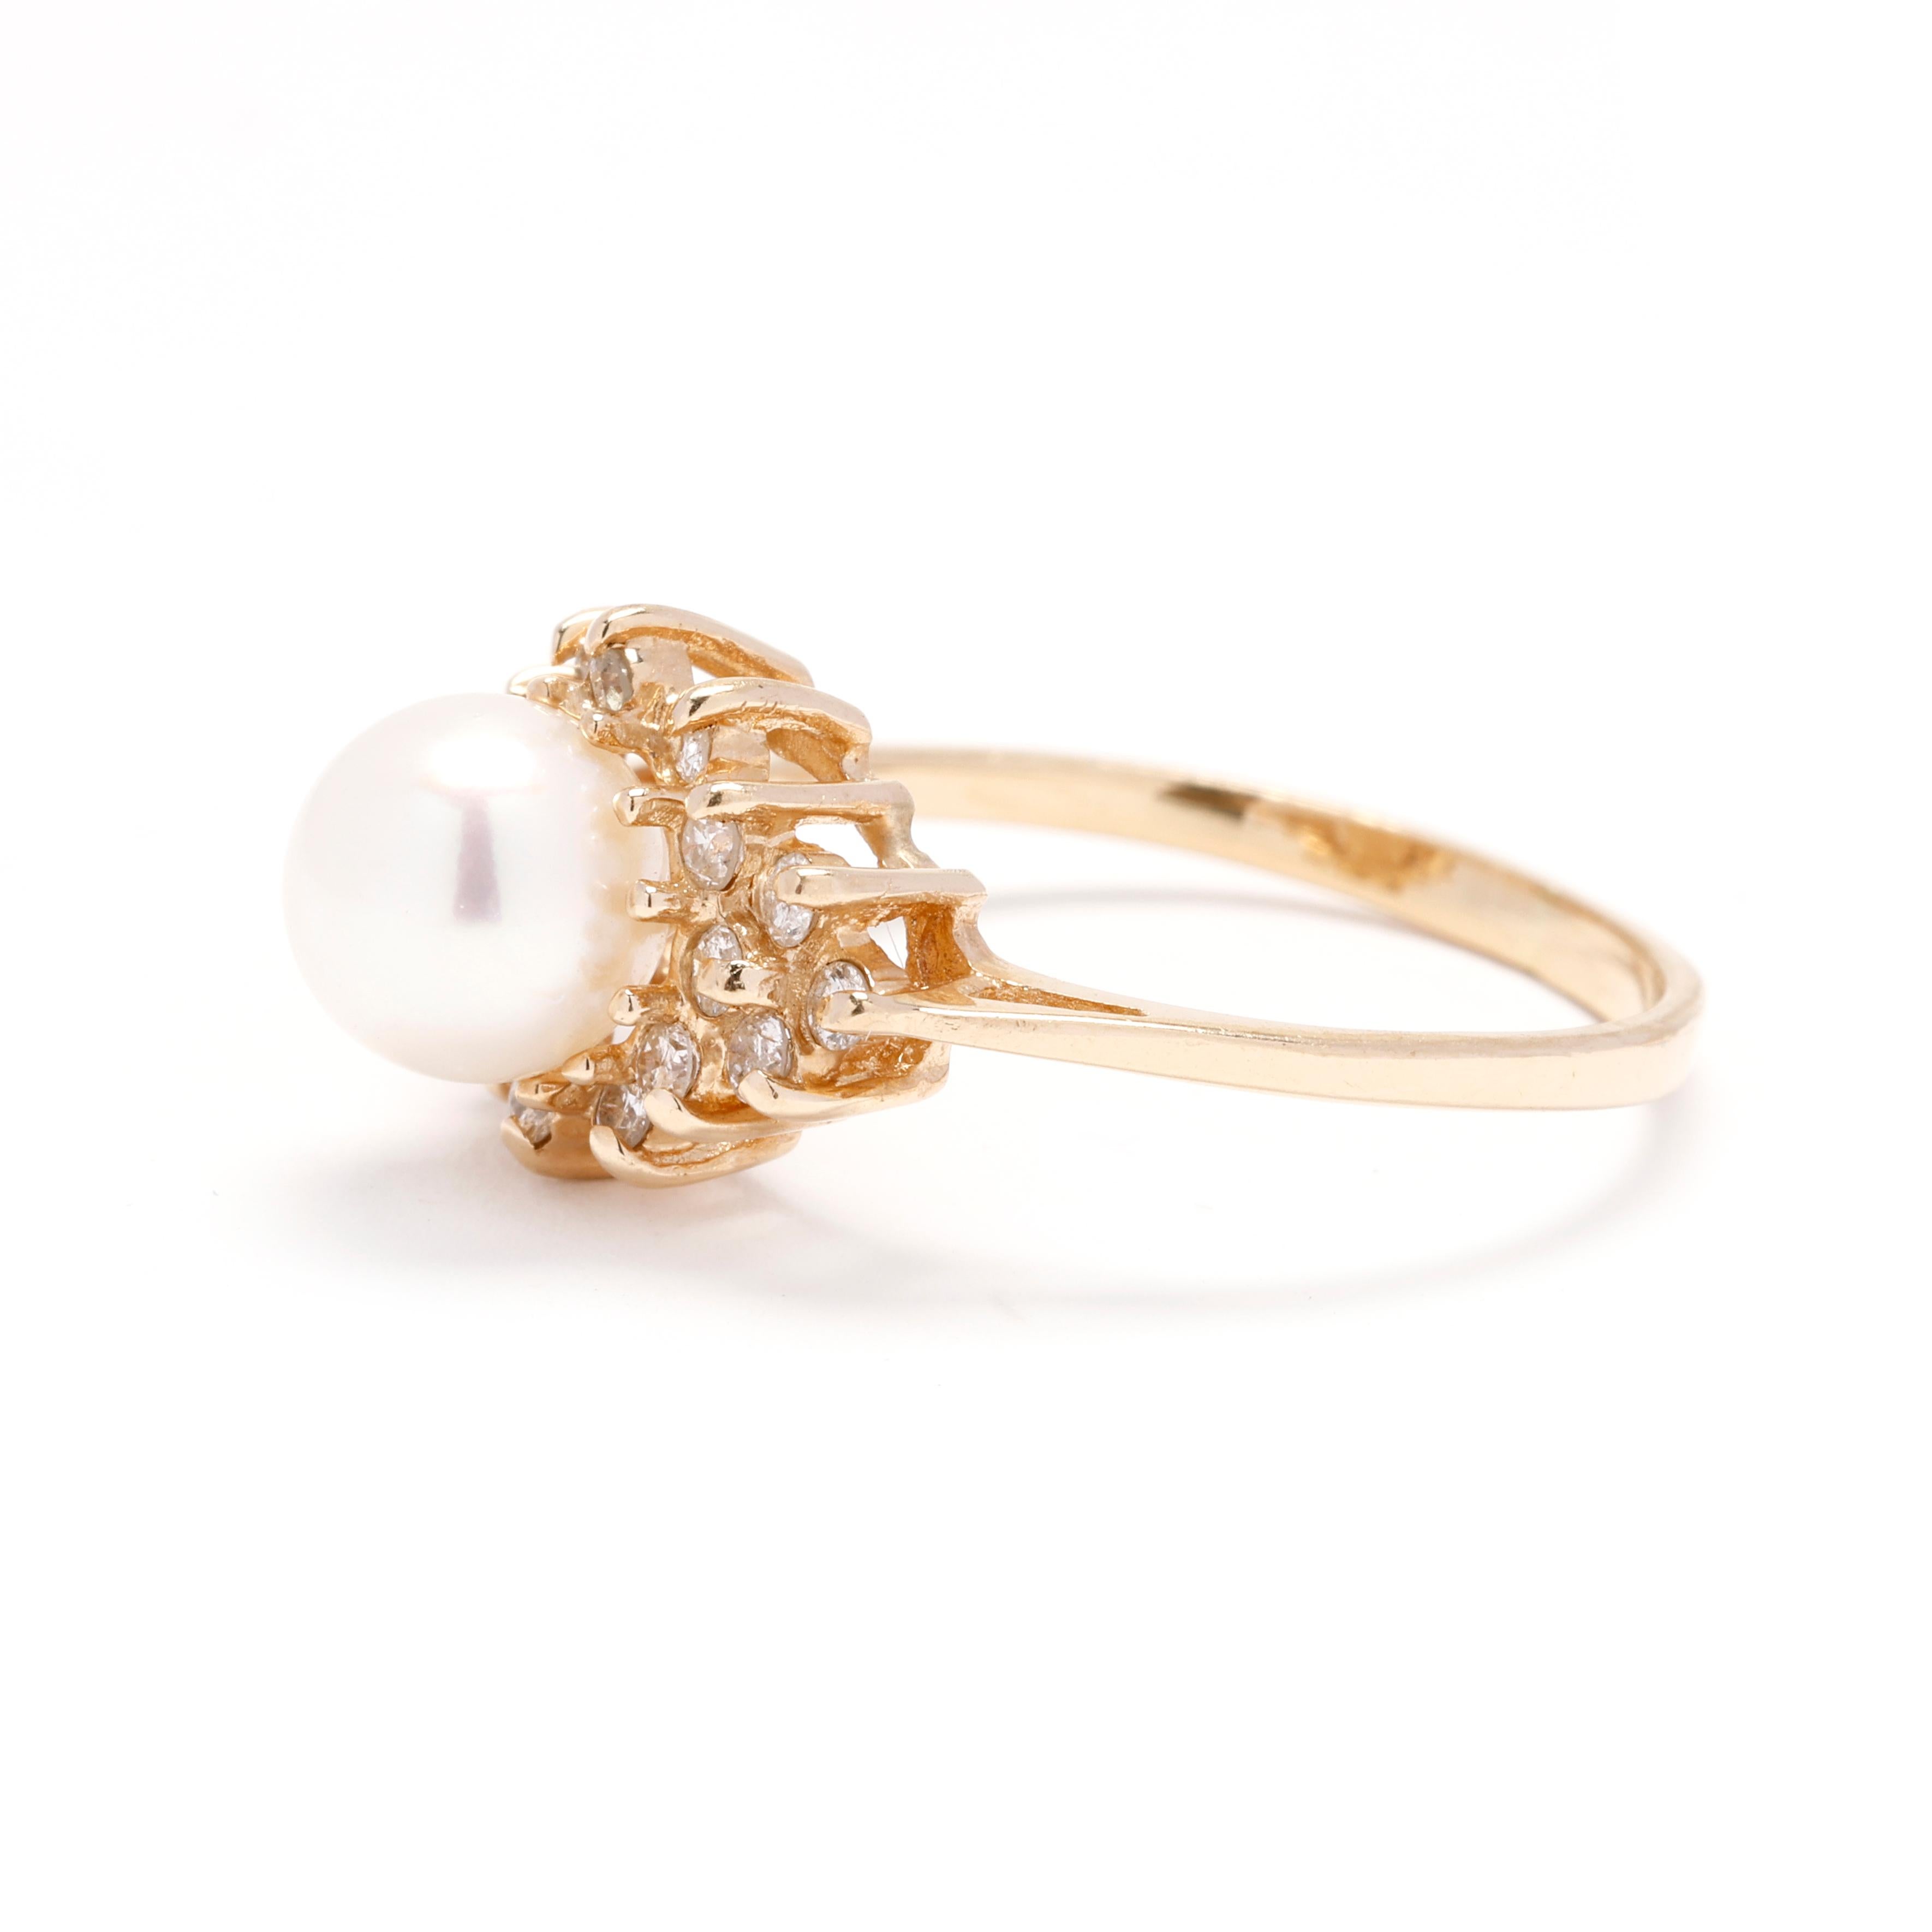  0.25ctw Diamond and Pearl Cluster Ring, 14k Yellow Gold, Ring Size 5.5 In Good Condition For Sale In McLeansville, NC